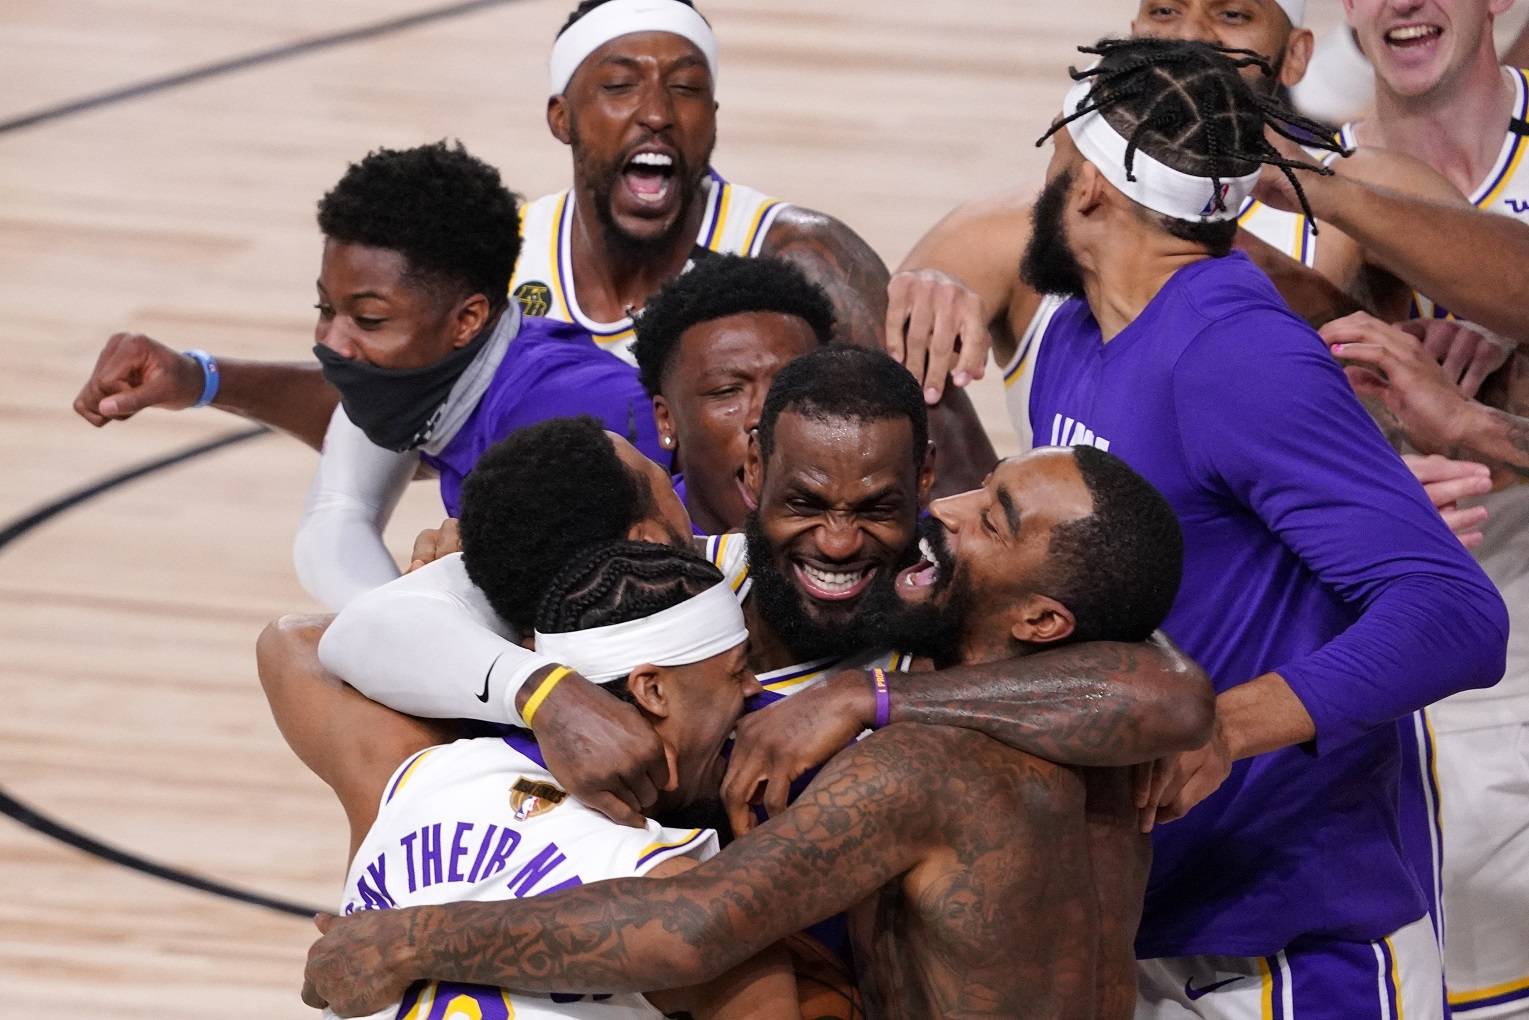 The Los Angeles Lakers’ LeBron James (23) celebrates with his teammates after the Lakers defeated the Miami Heat 106-93 in Game 6 of basketball’s NBA Finals Sunday in Lake Buena Vista, Fla. (Mark J. Terrill/Associated Press)